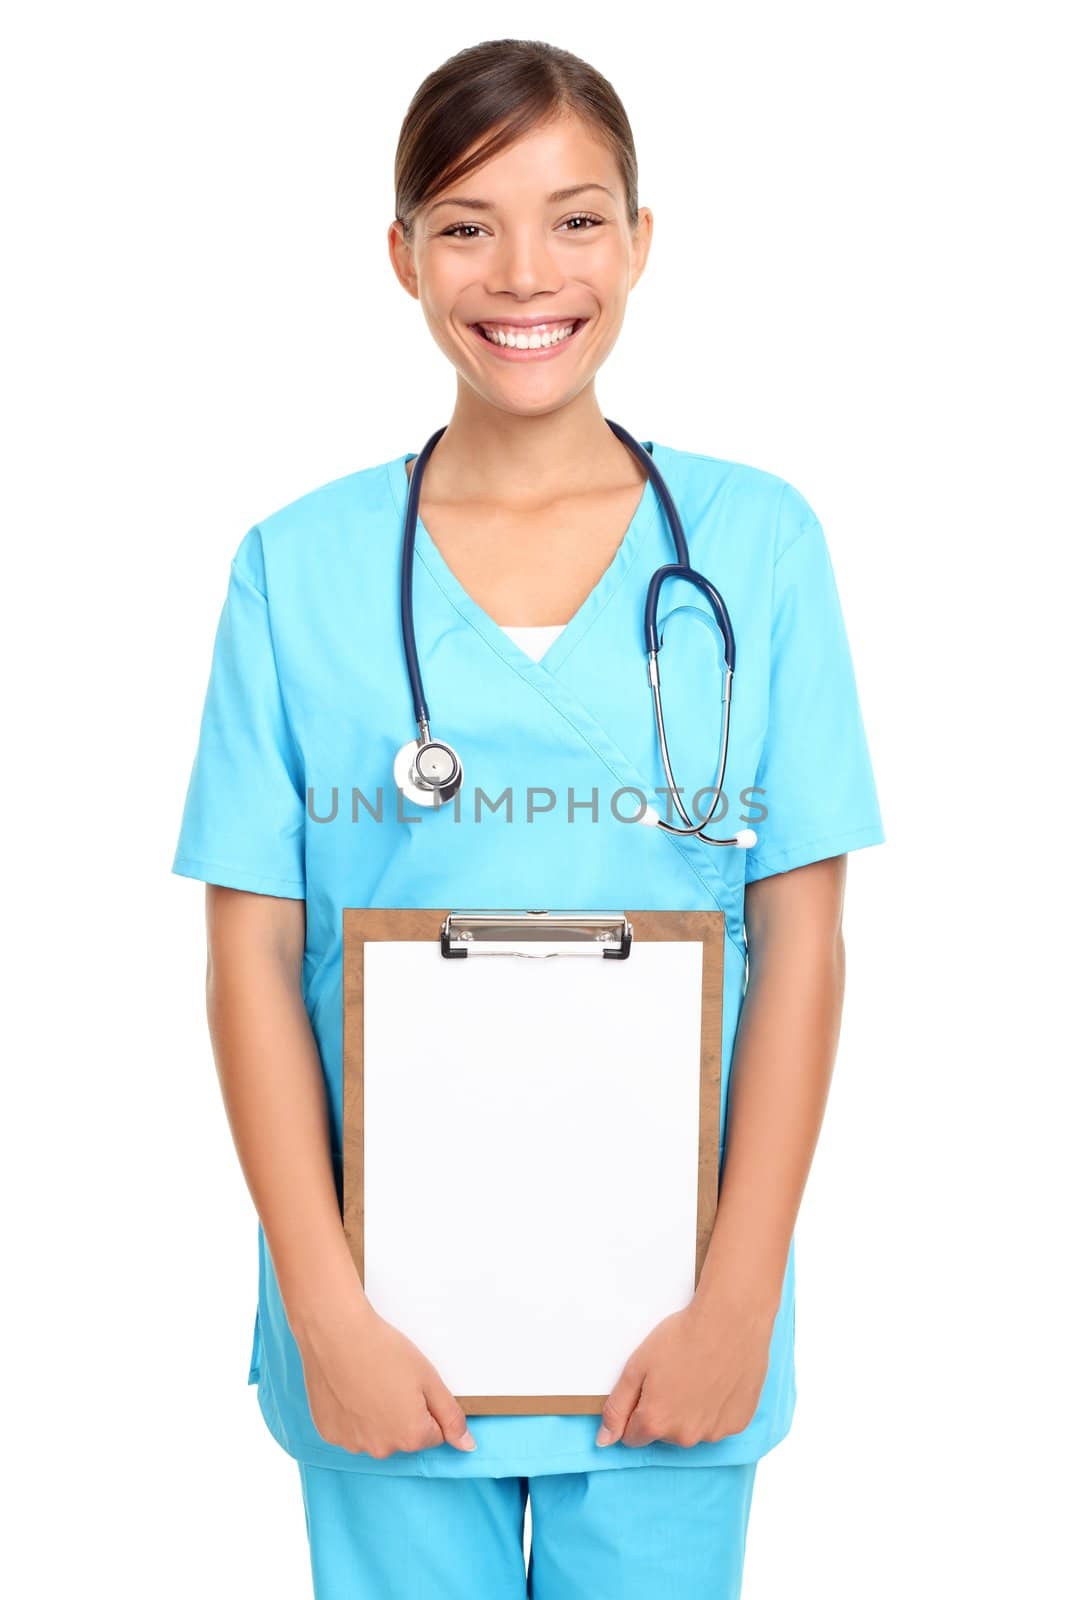 Medical nurse or young woman doctor isolated on white background holding clipboard. Beautiful friendly looking woman in her twenties.